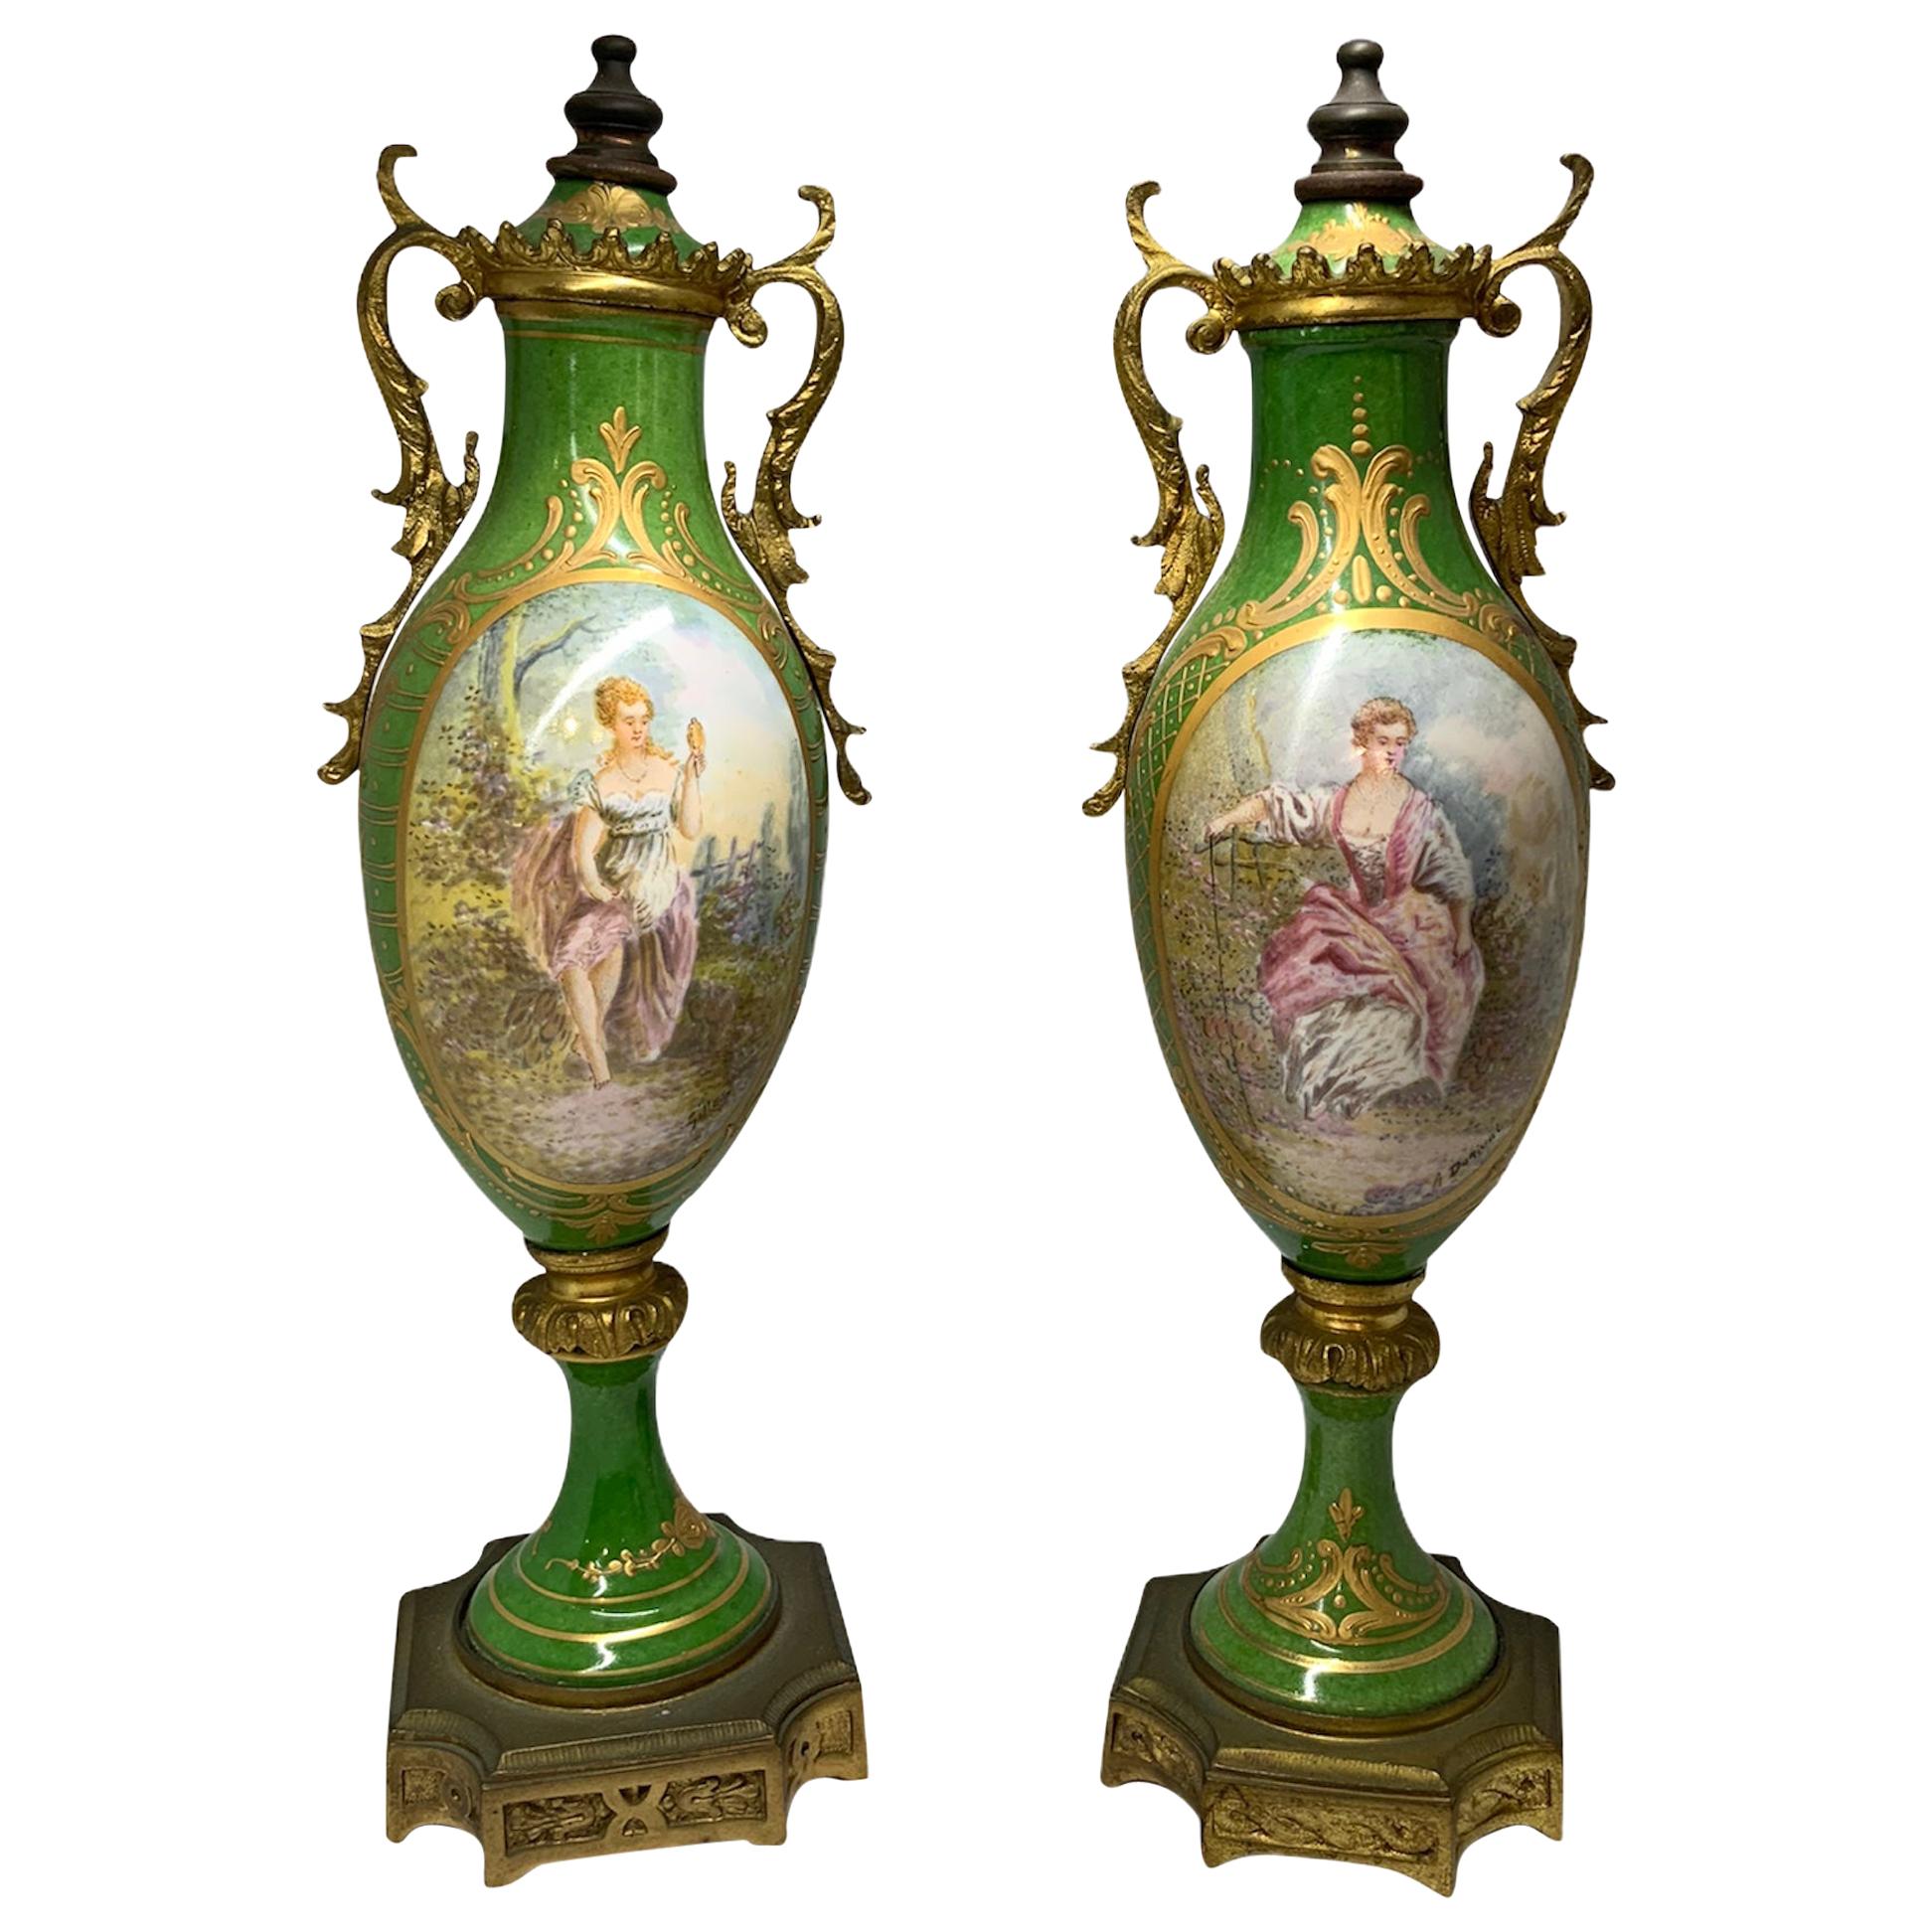 Pair of French Sevres Style Porcelain Bronze Mounted Urns Vases